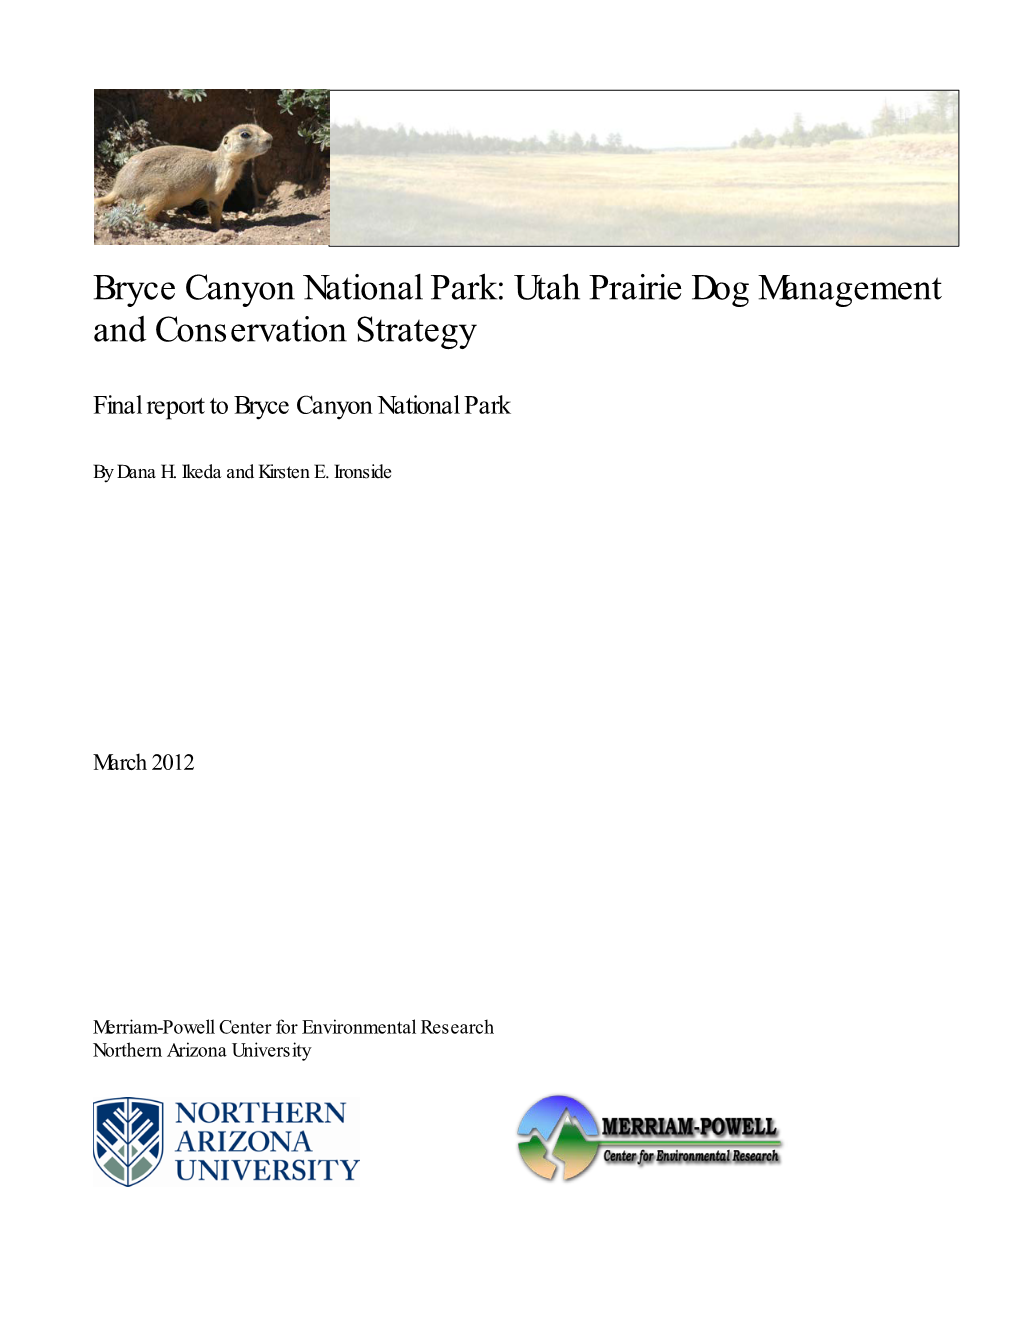 Bryce Canyon National Park: Utah Prairie Dog Management and Conservation Strategy